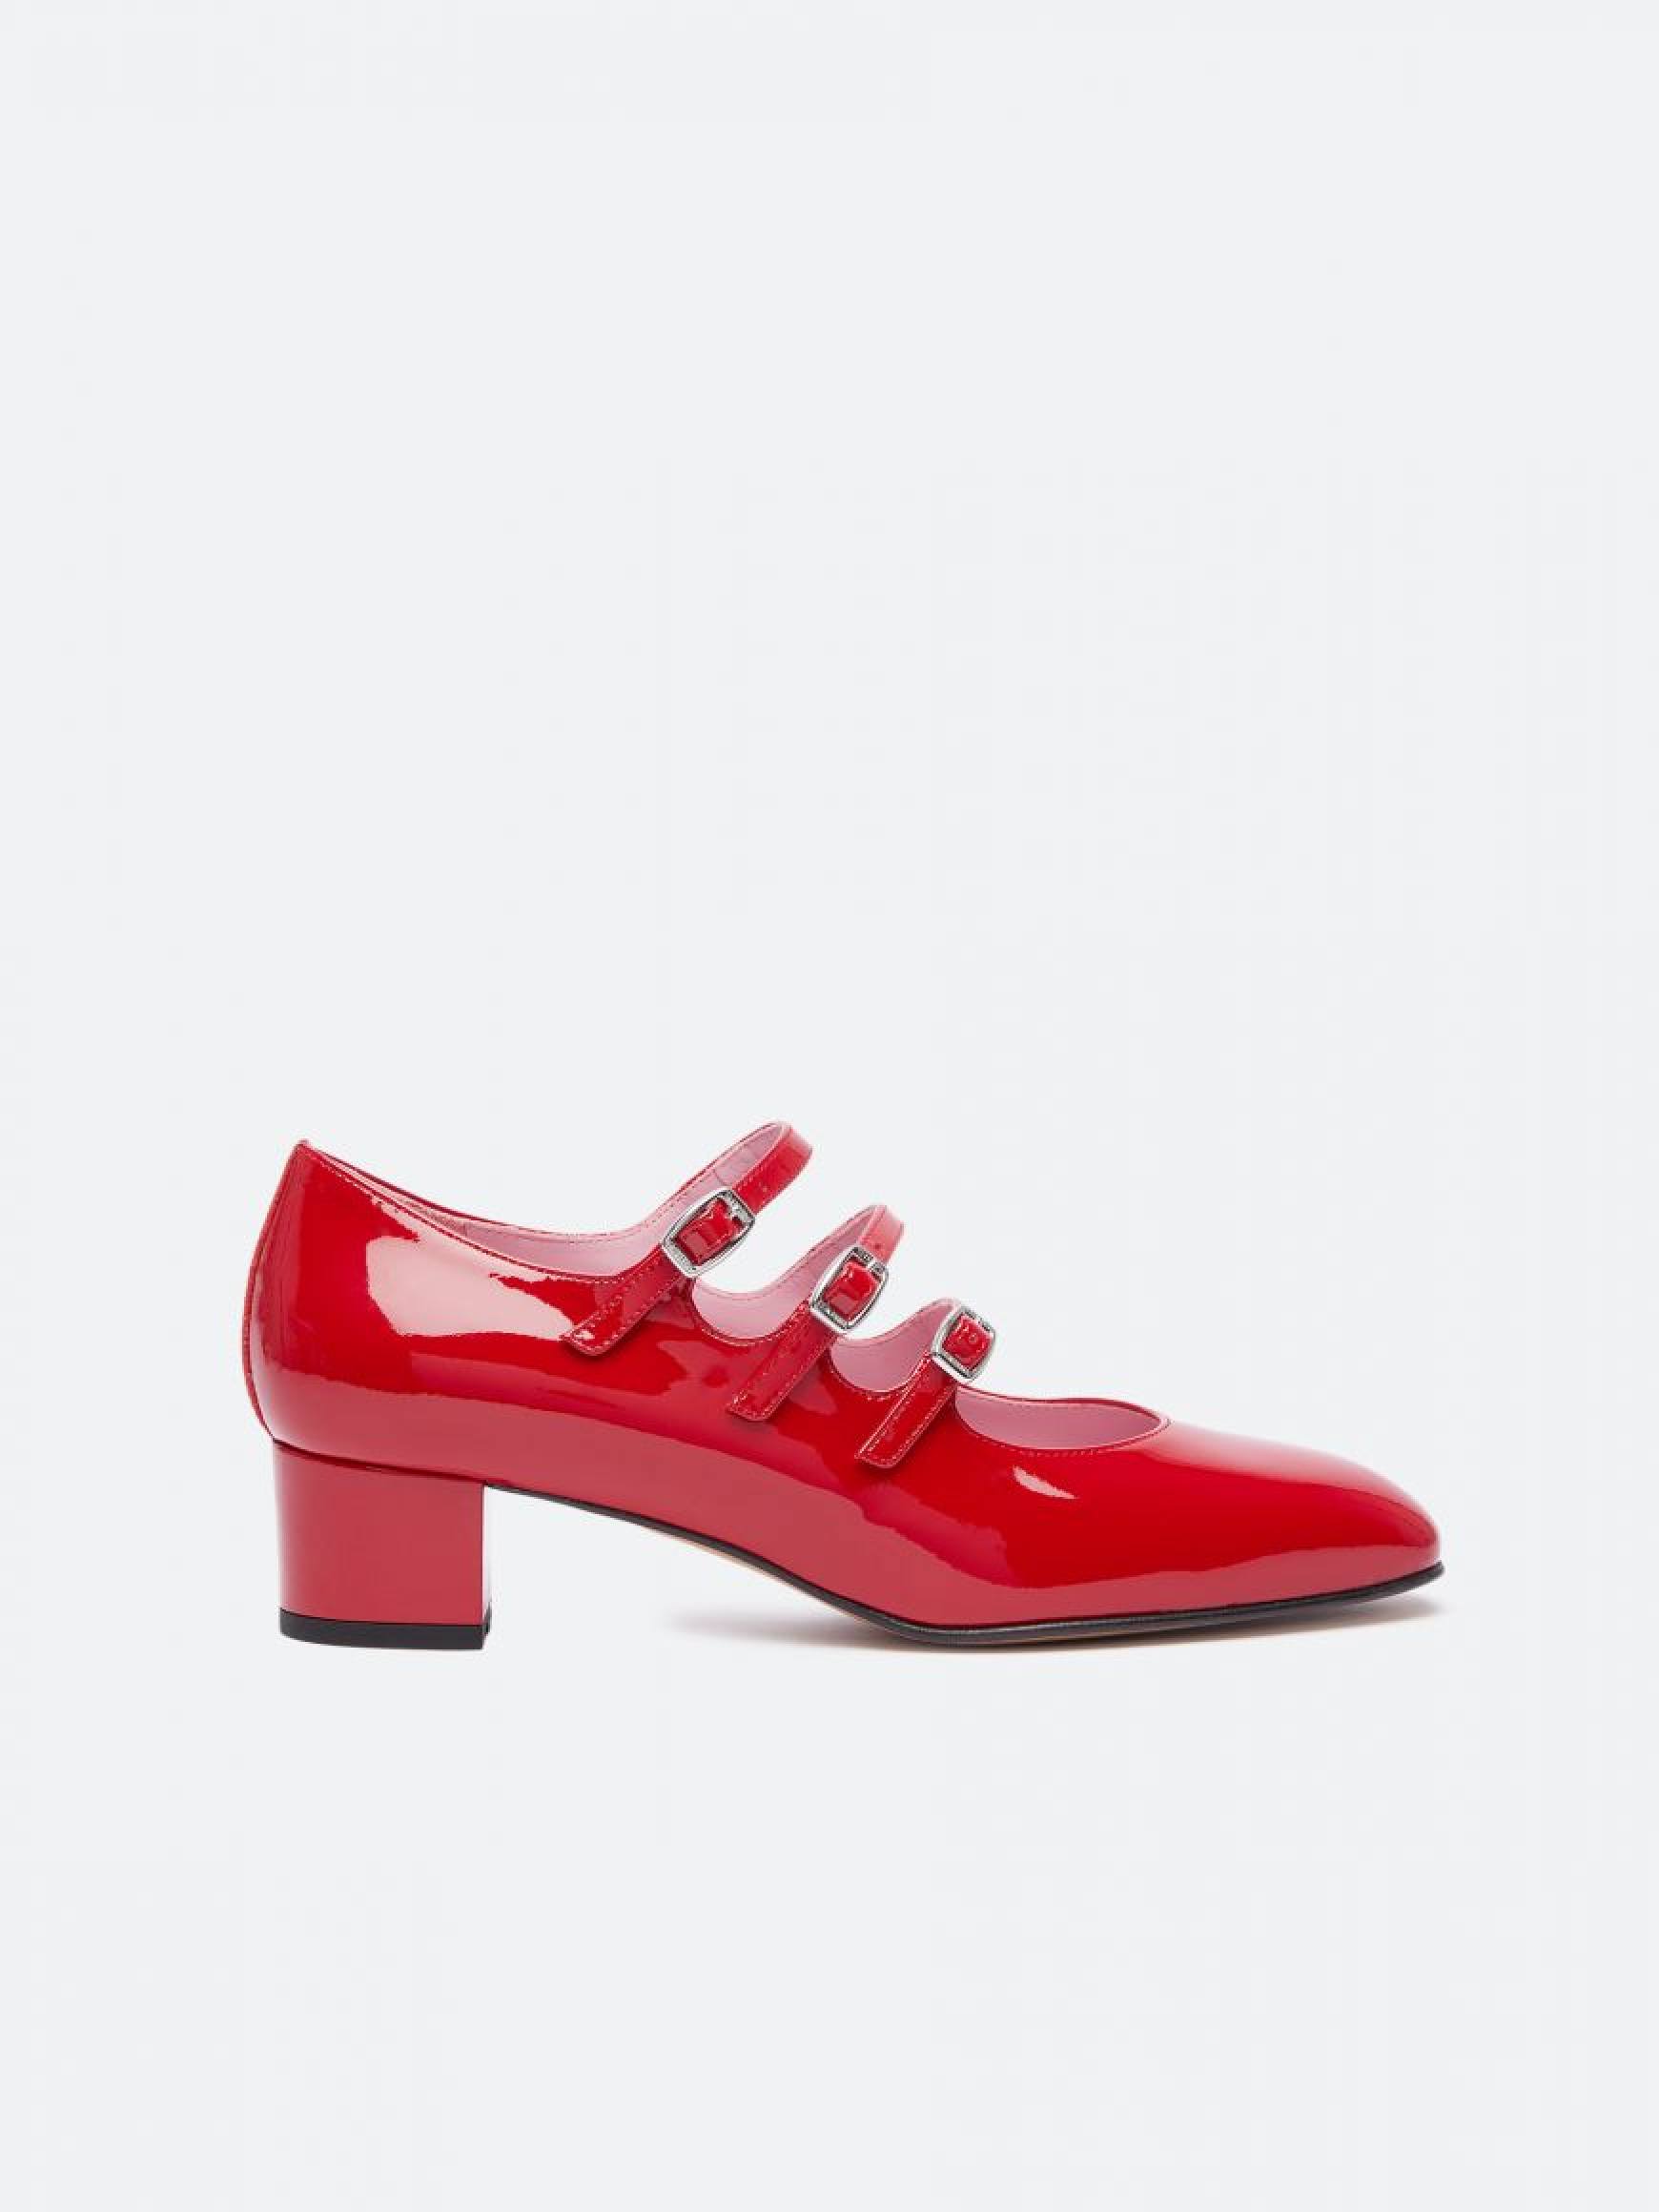 Why Mary Janes are trendy and timeless, plus 6 pairs to shop right now ...